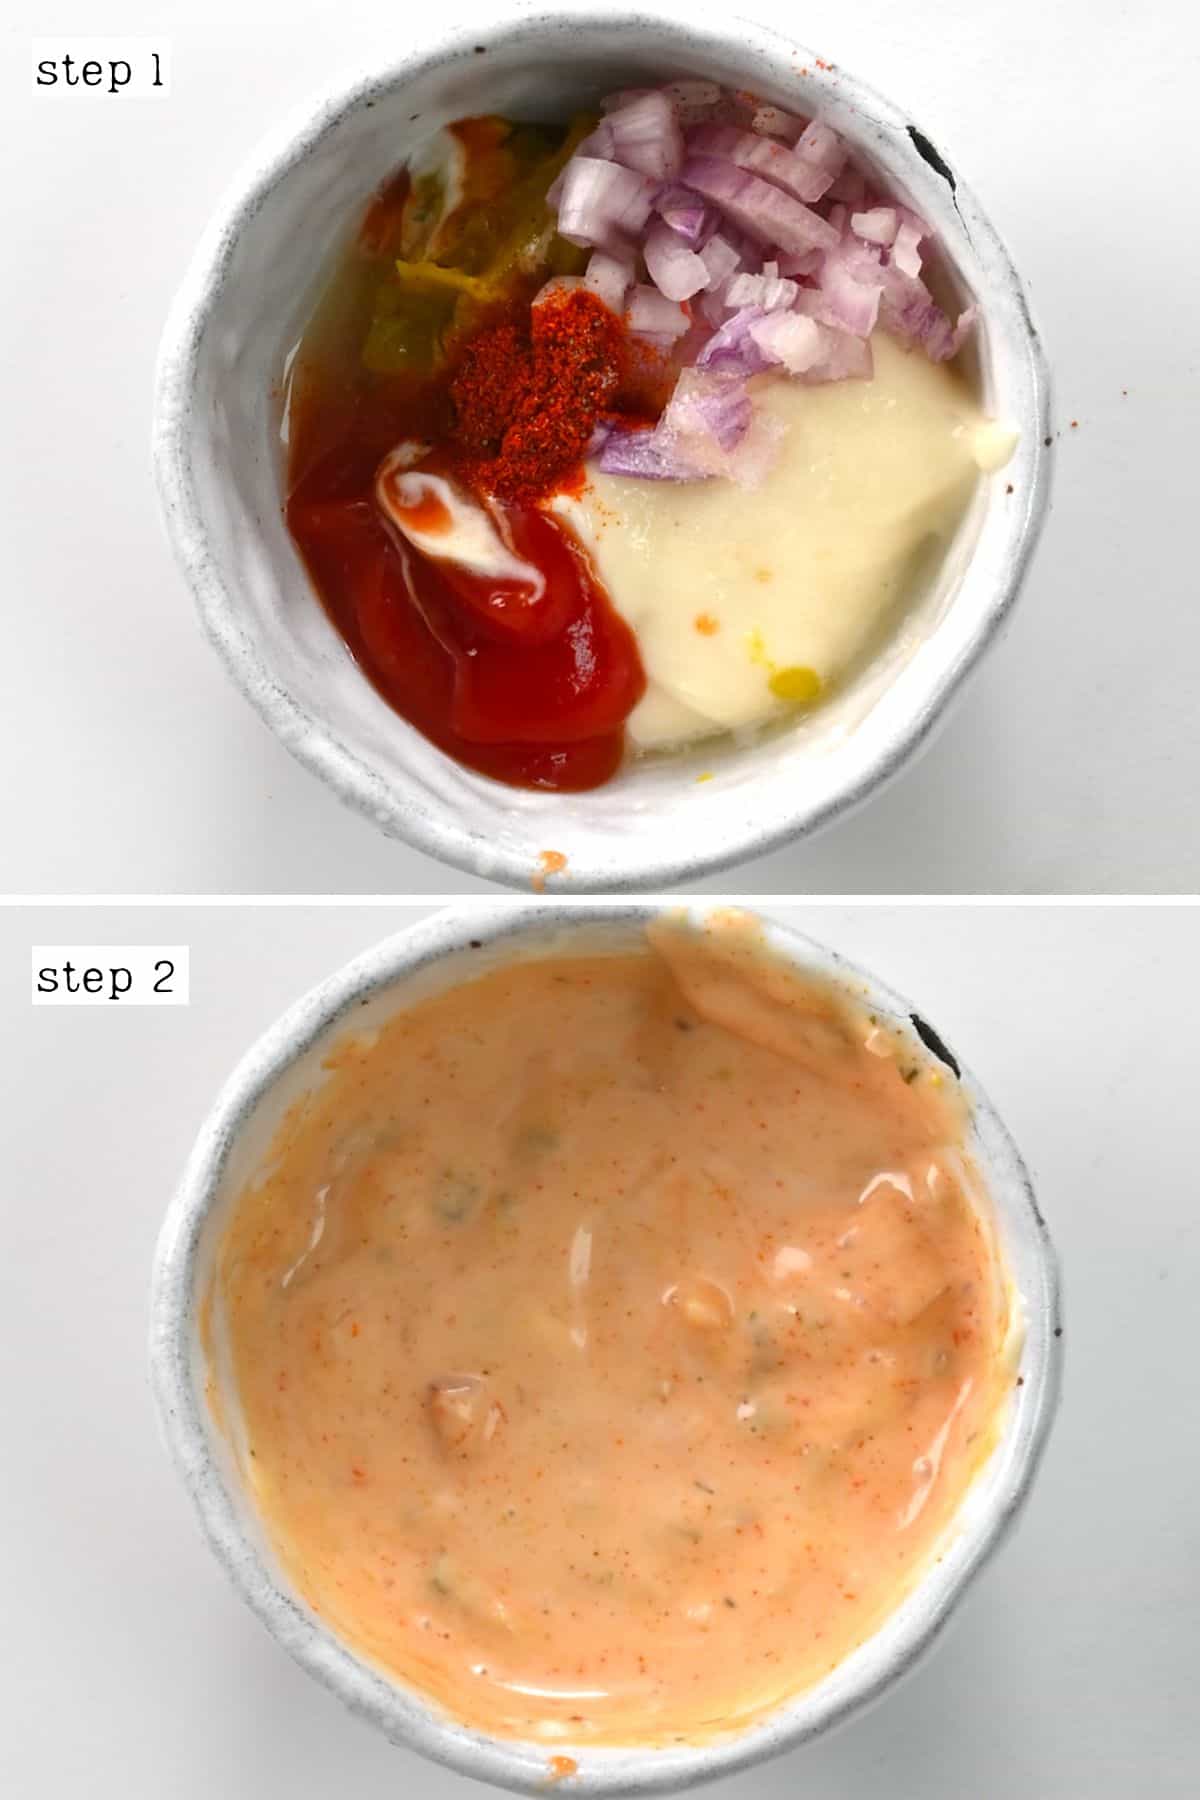 Steps for making Thousand Island dressing